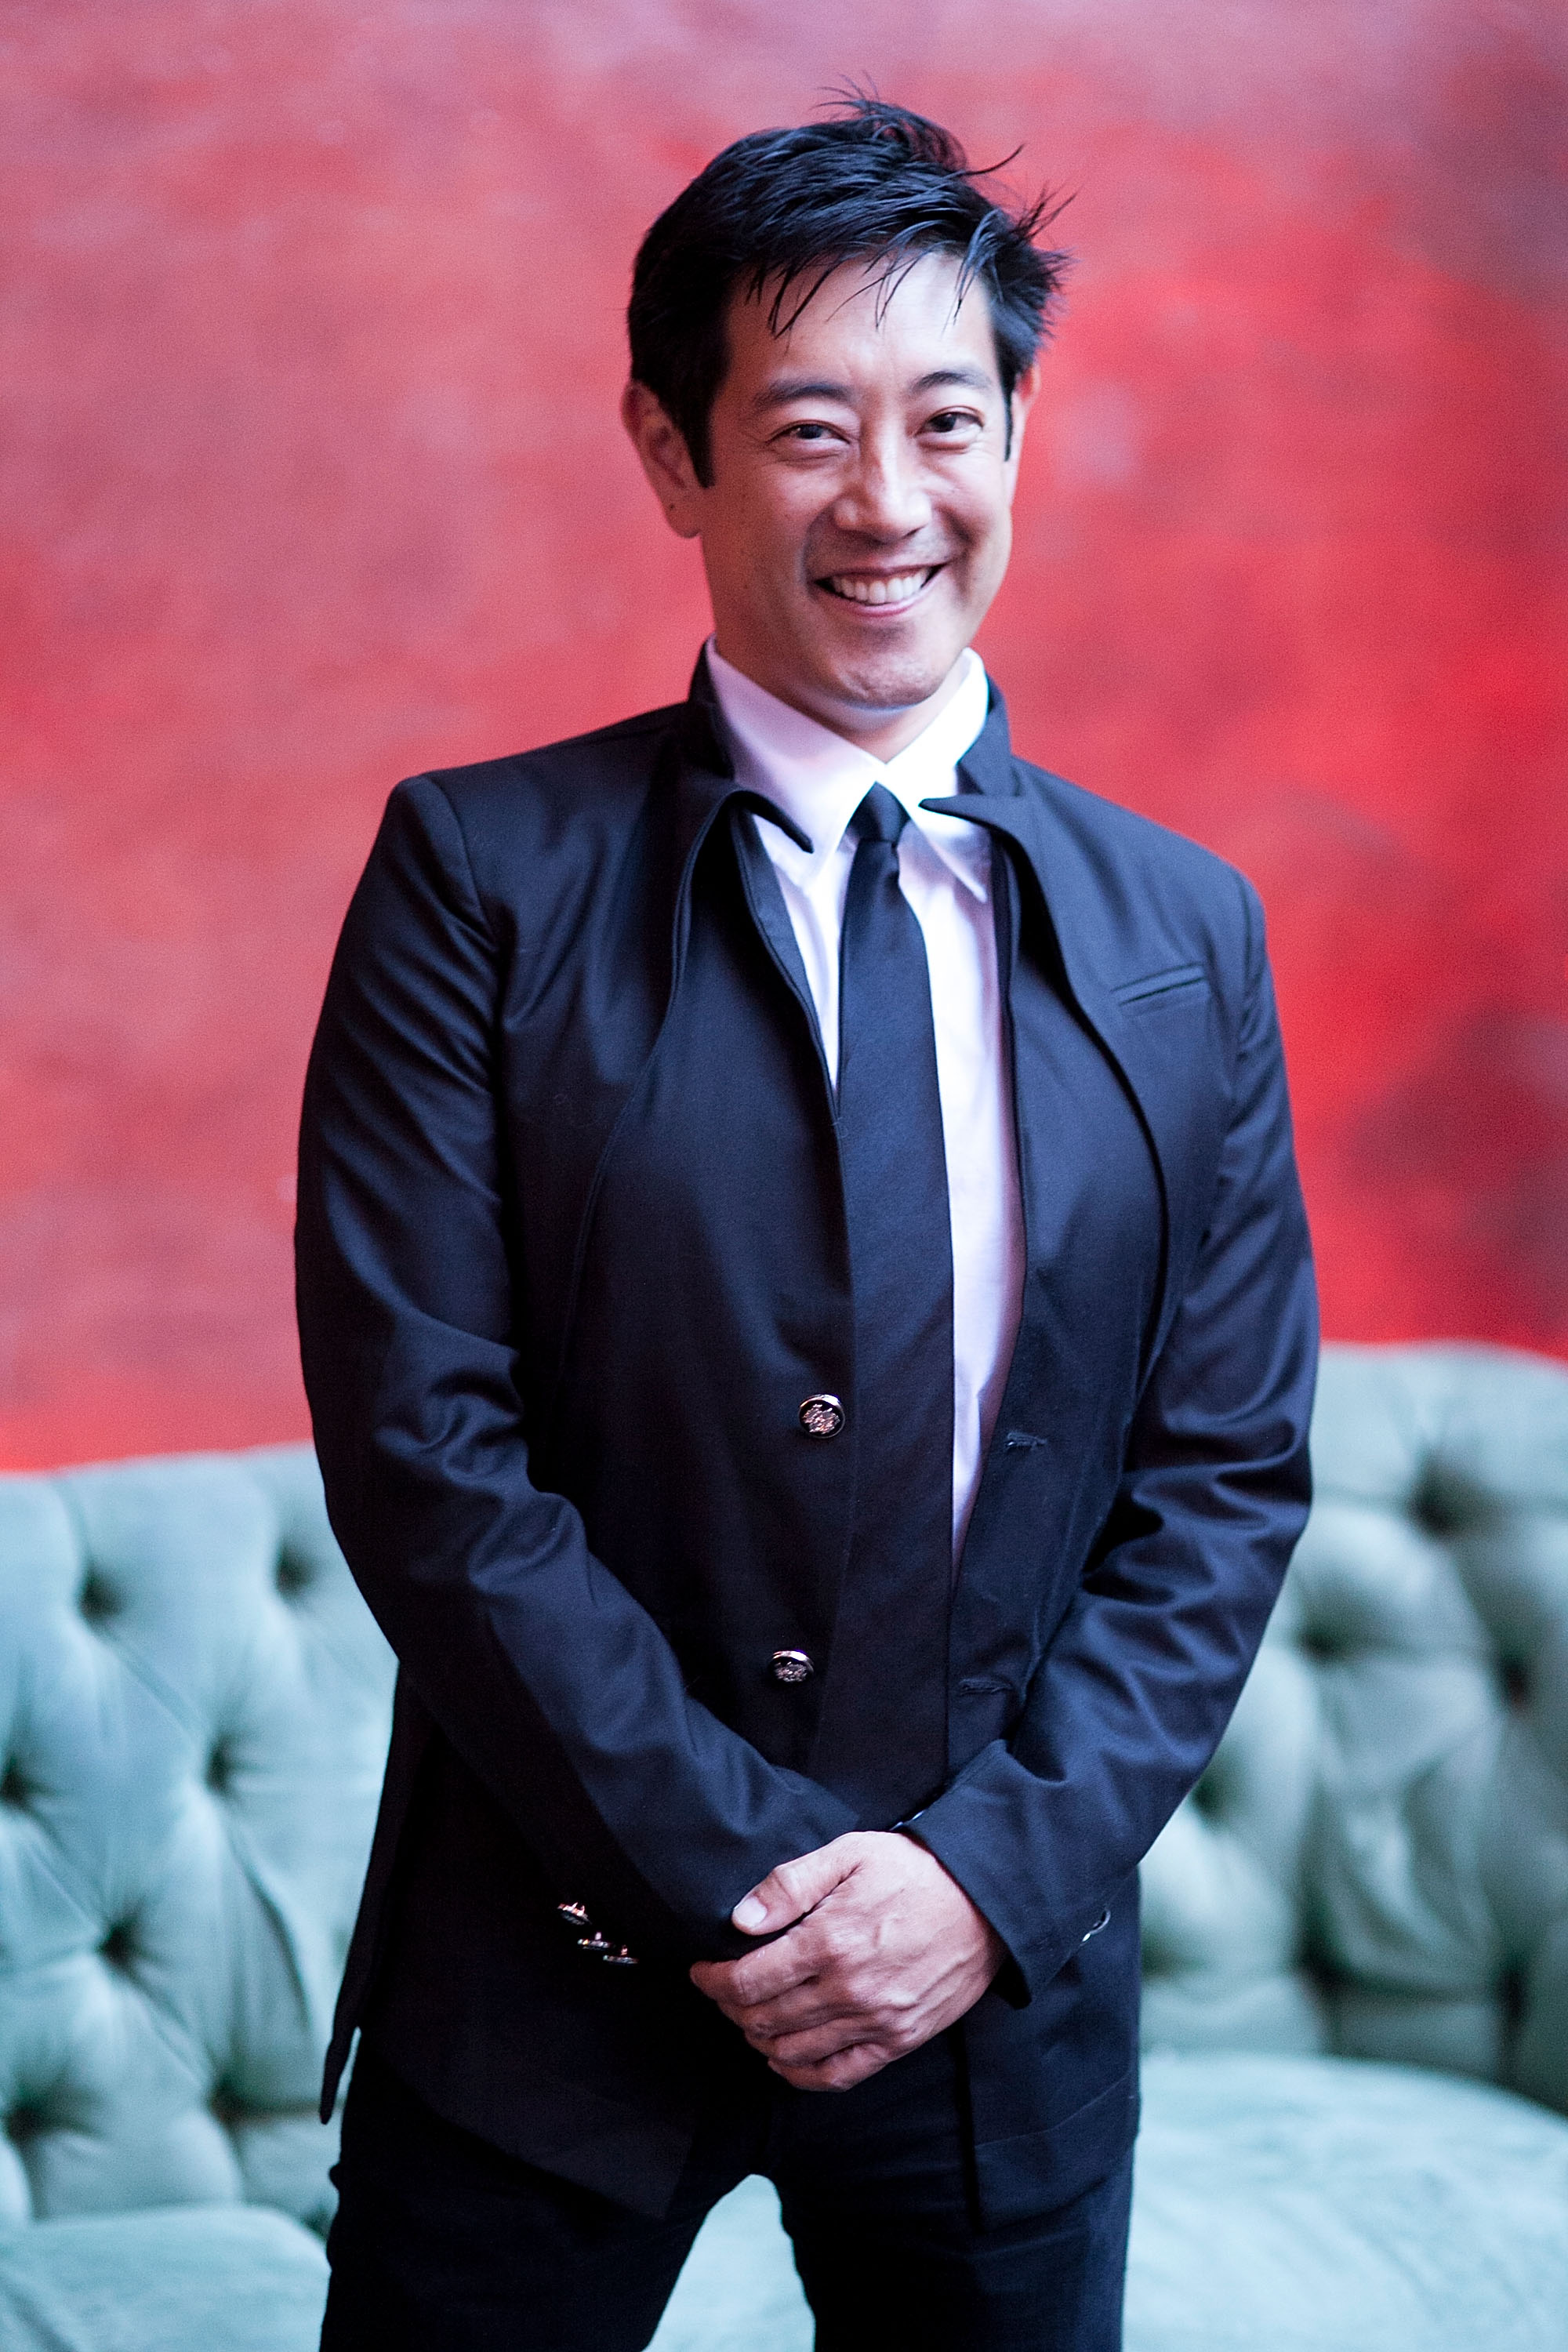 Grant Imahara attends The Geekie Awards 2014 at Avalon on August 17, 2014 in Hollywood, California. | Photo: Getty Images